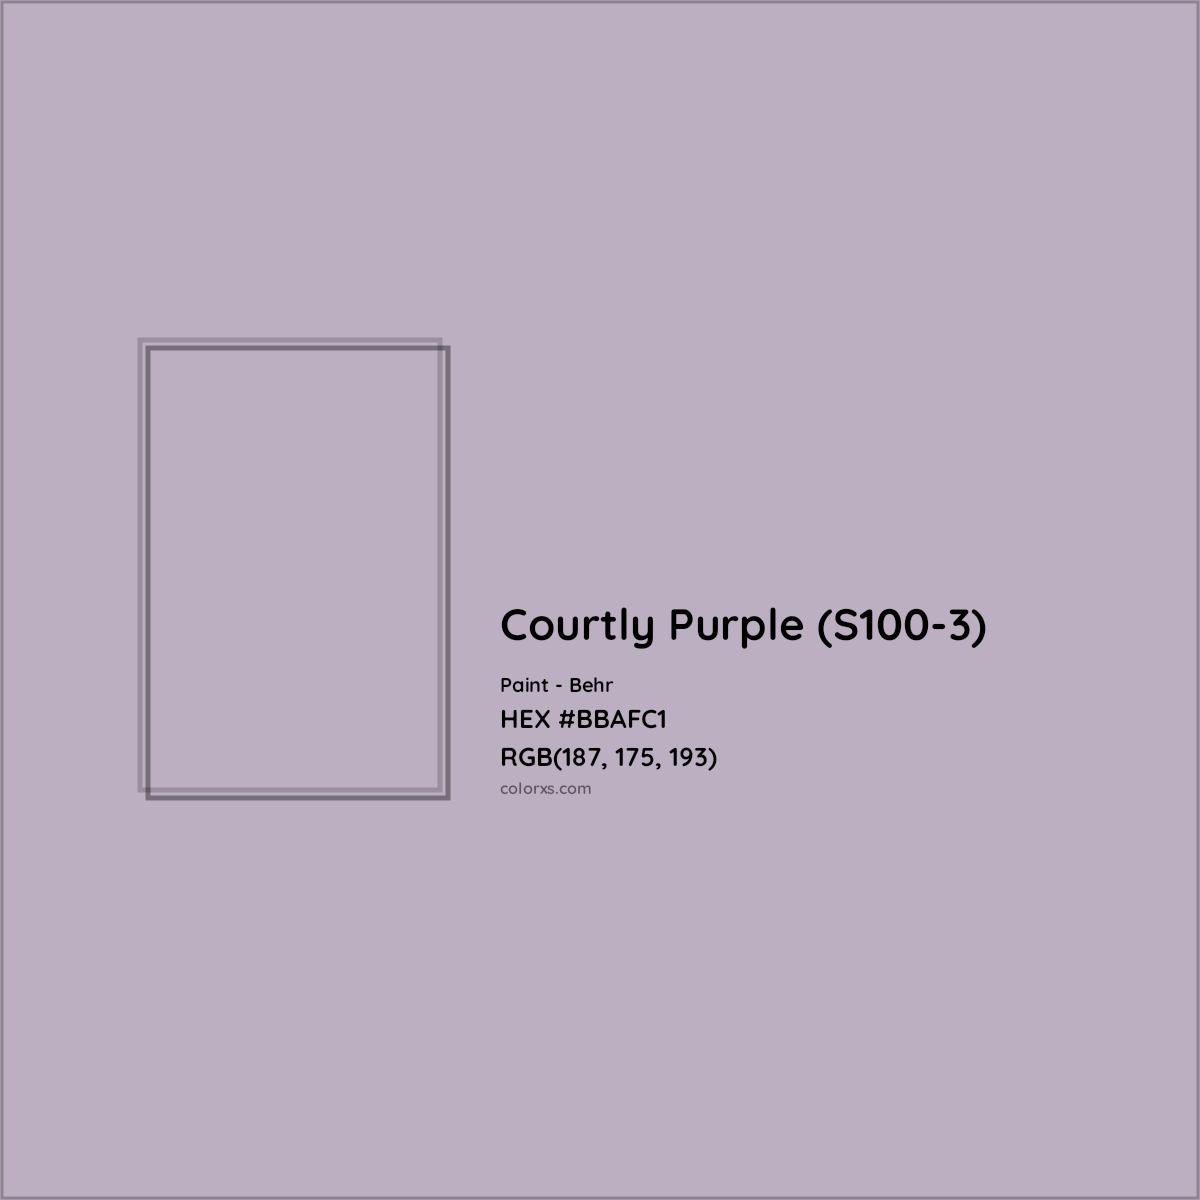 HEX #BBAFC1 Courtly Purple (S100-3) Paint Behr - Color Code